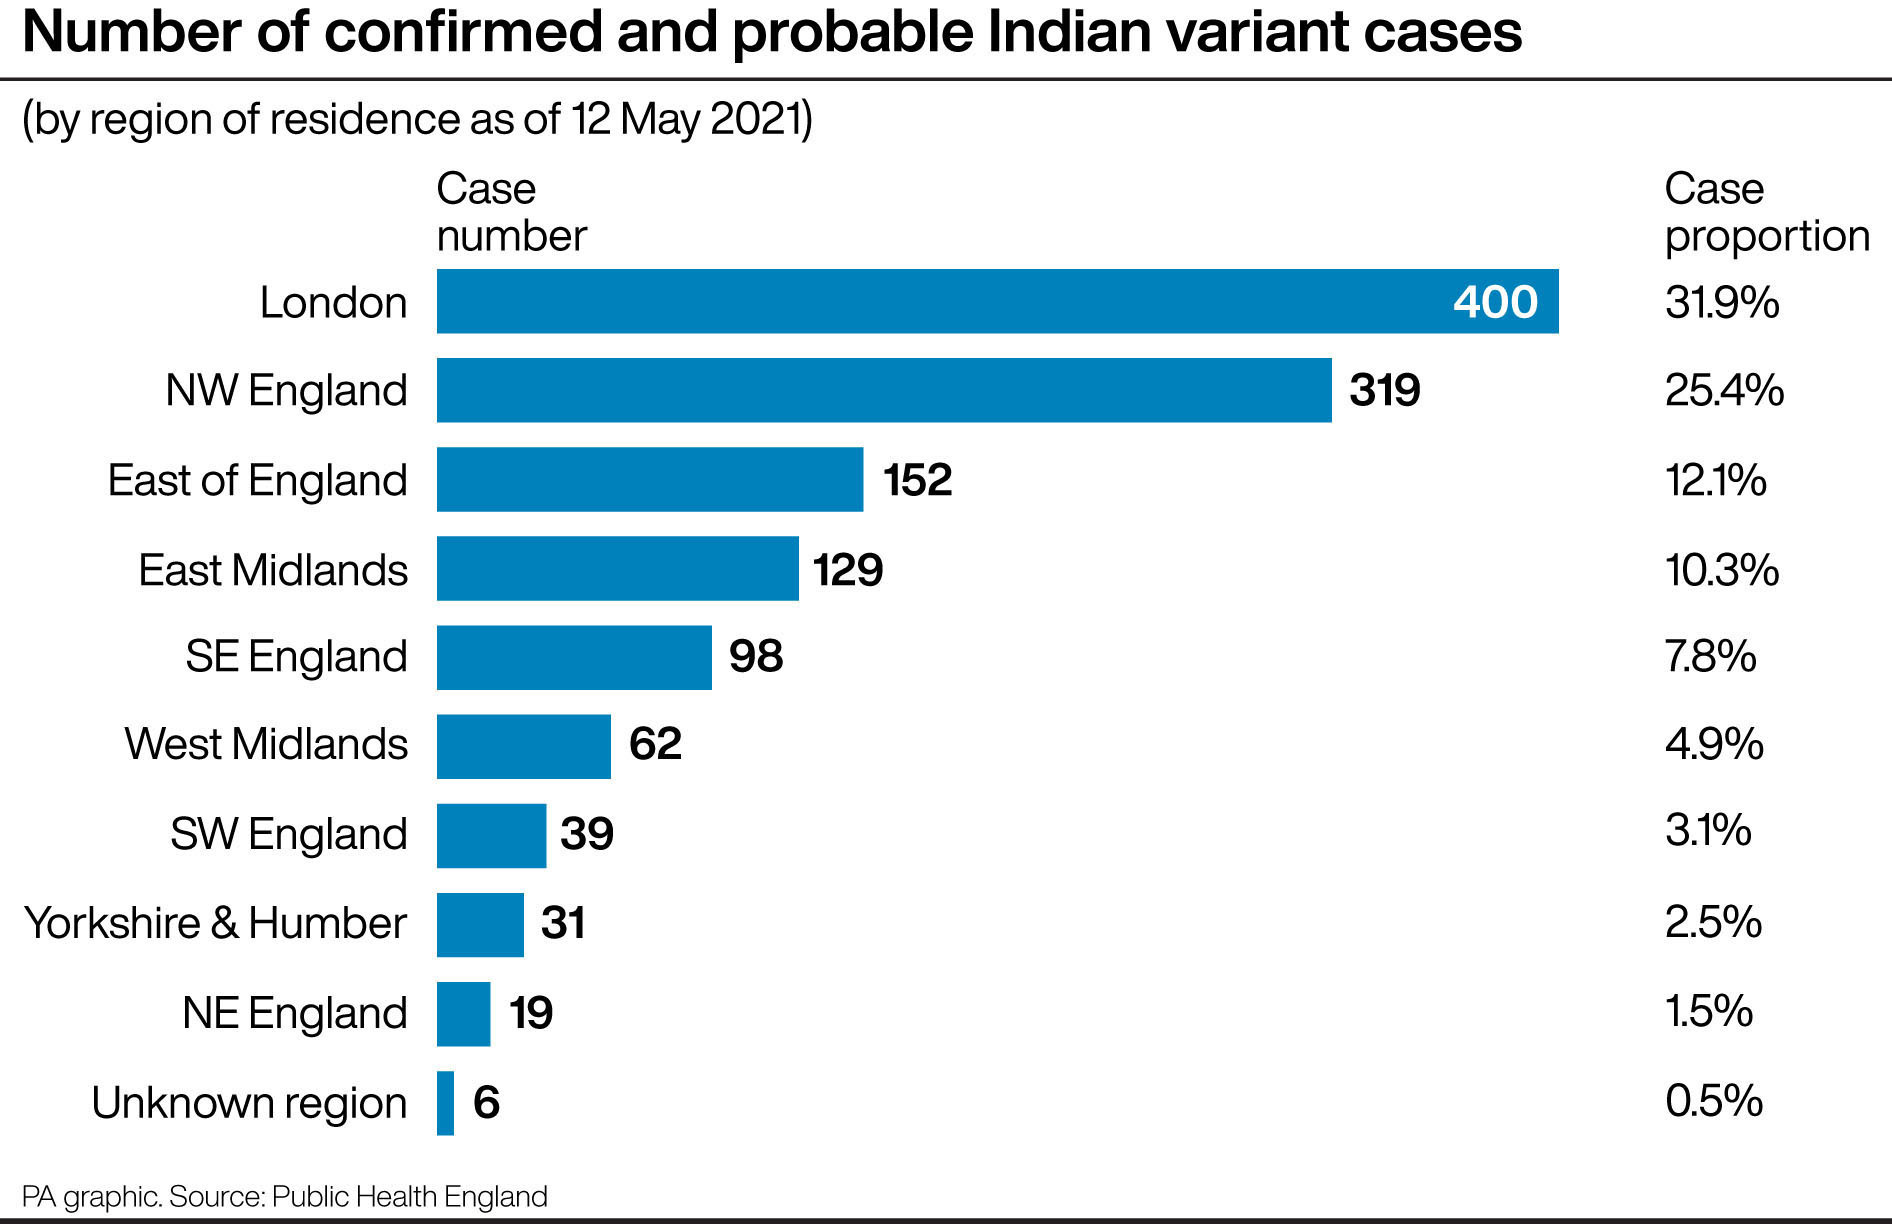 Number of confirmed and probable Indian variant cases. Infographic PA Graphics.